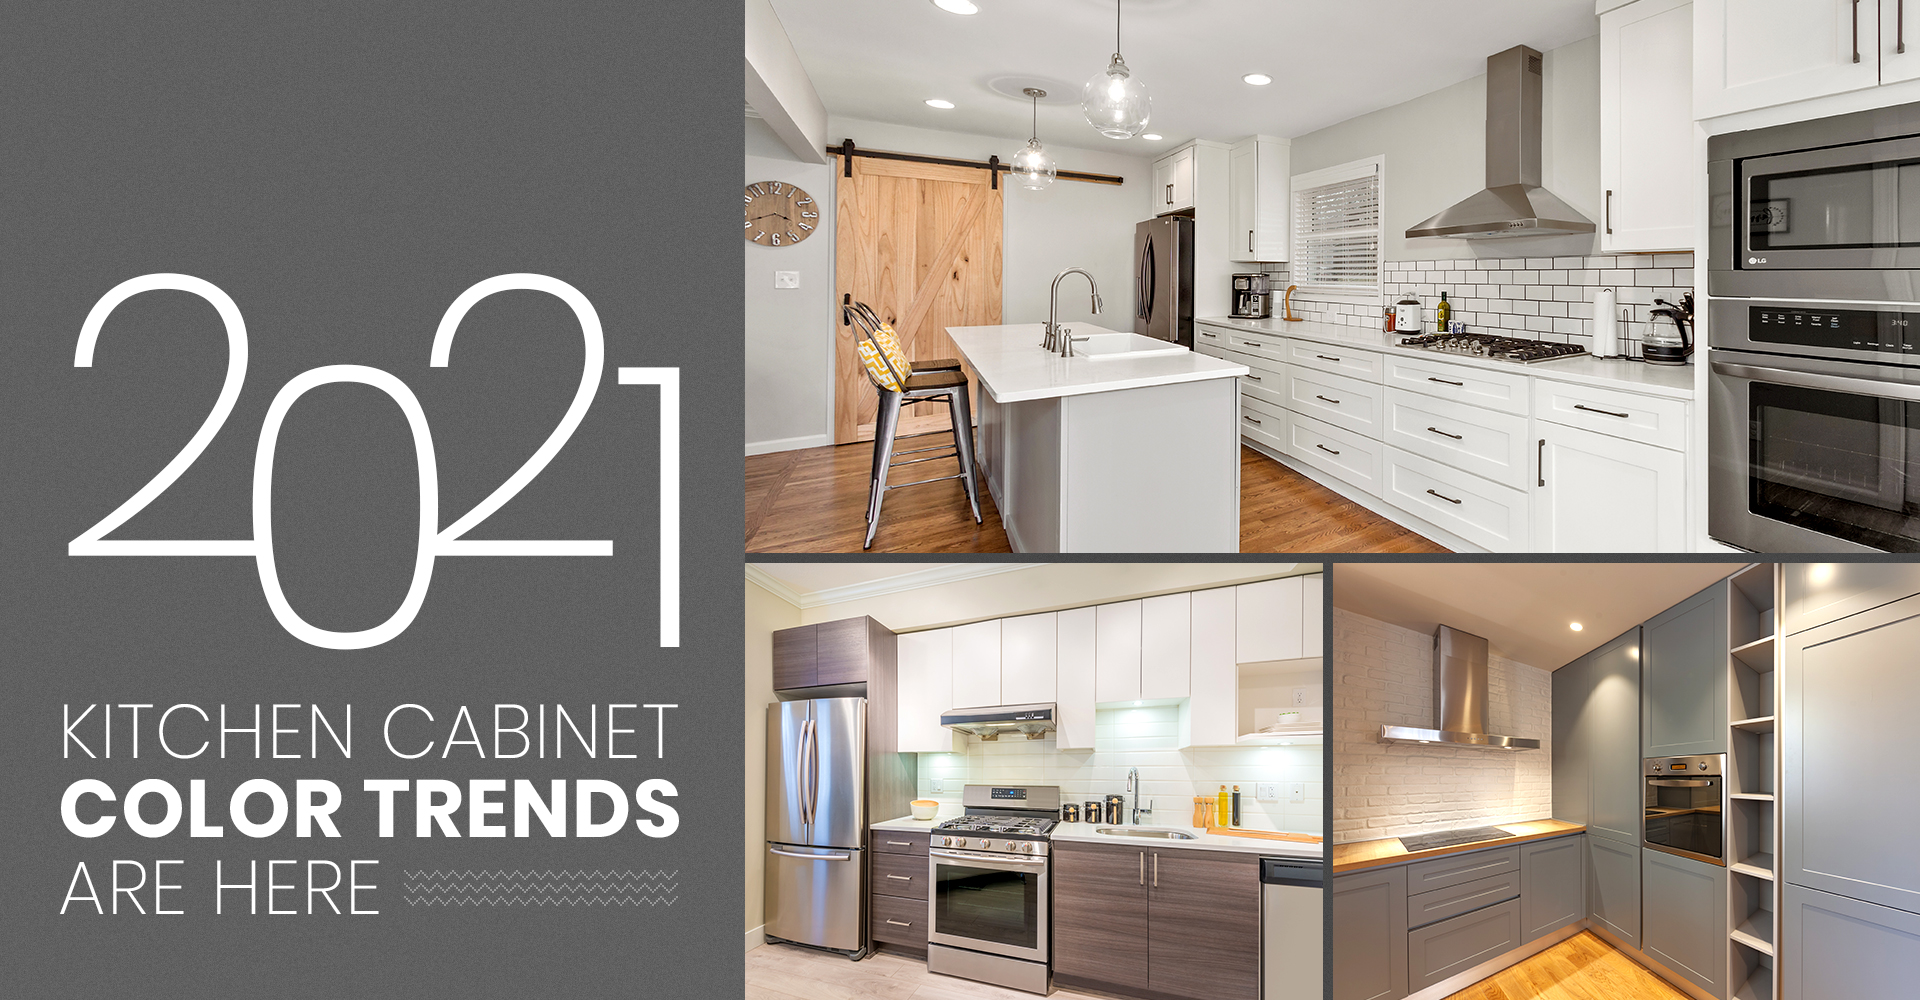 2021 Kitchen Color Trends Are Here